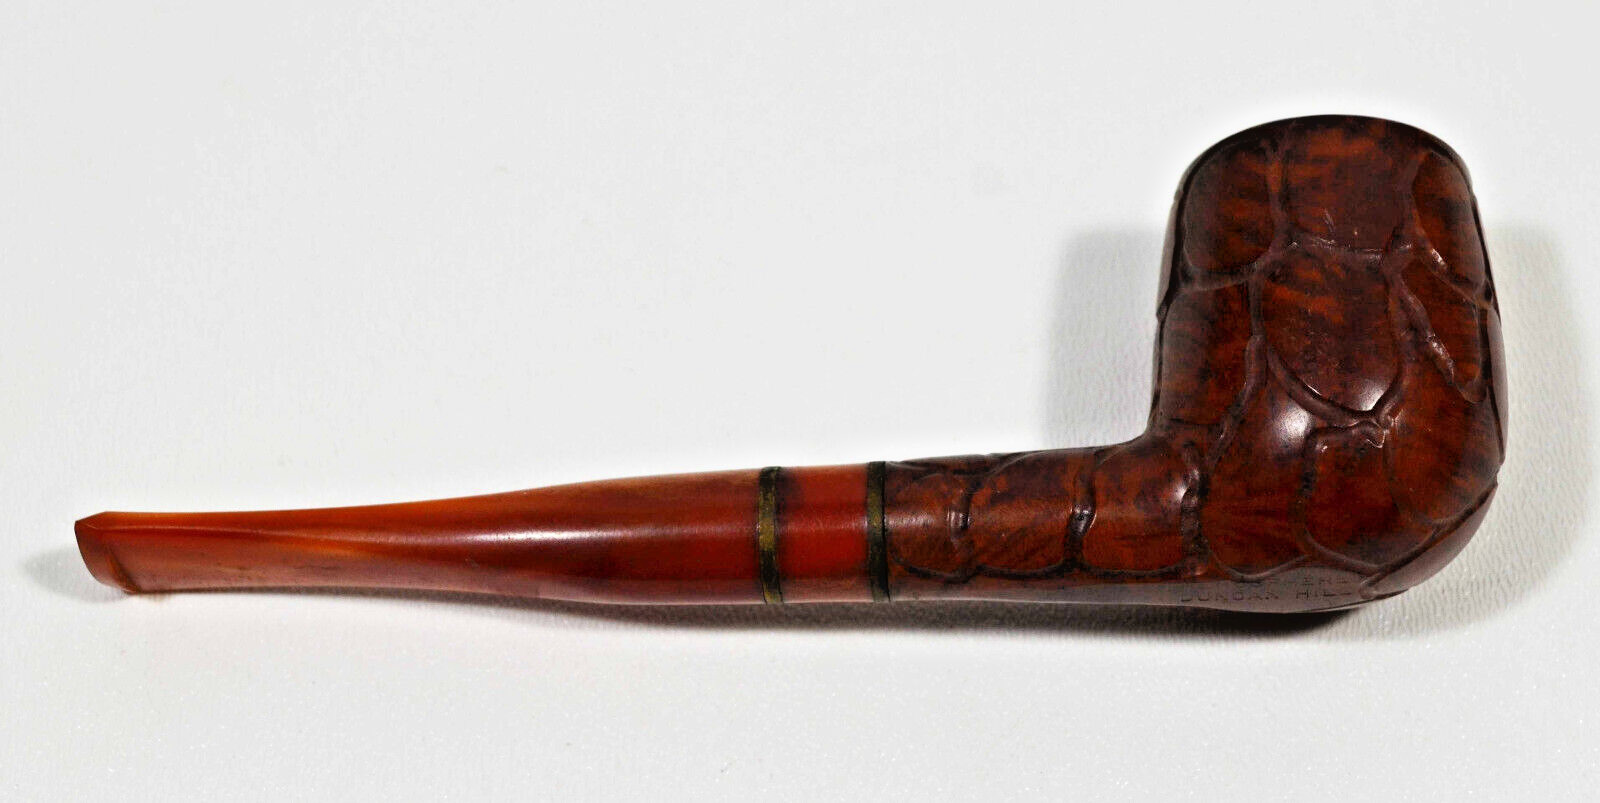 Vintage Aerosphere Duncan Hill Pipe - Great Condition - Very Clean